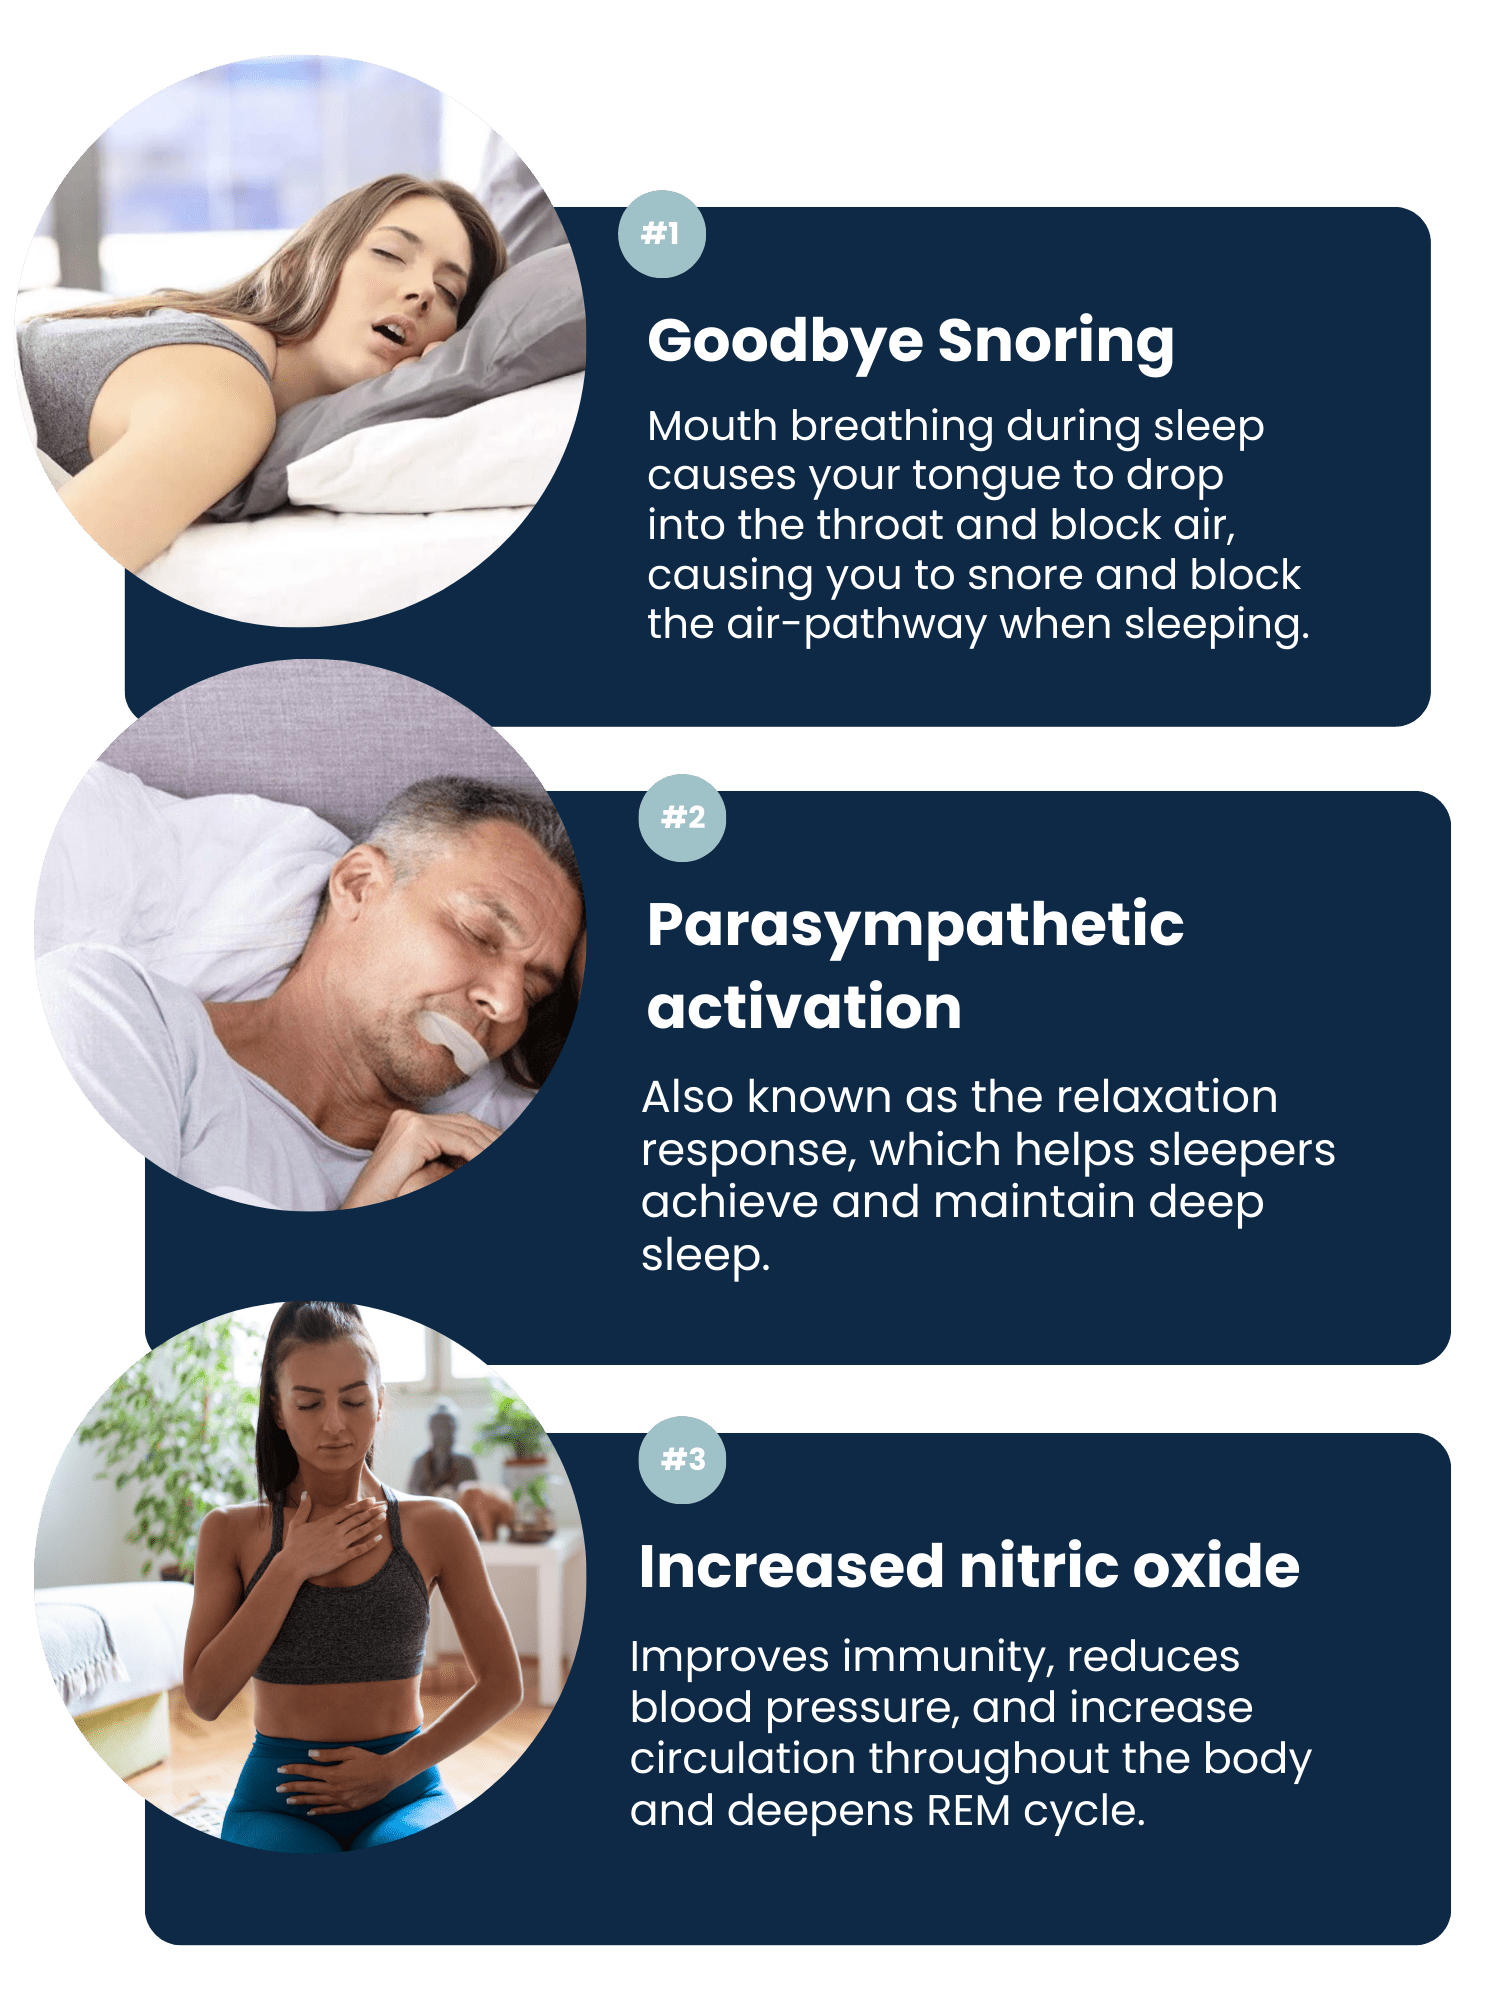 Herbal Sleep Remedies: Infographic of benefits for nose breathing